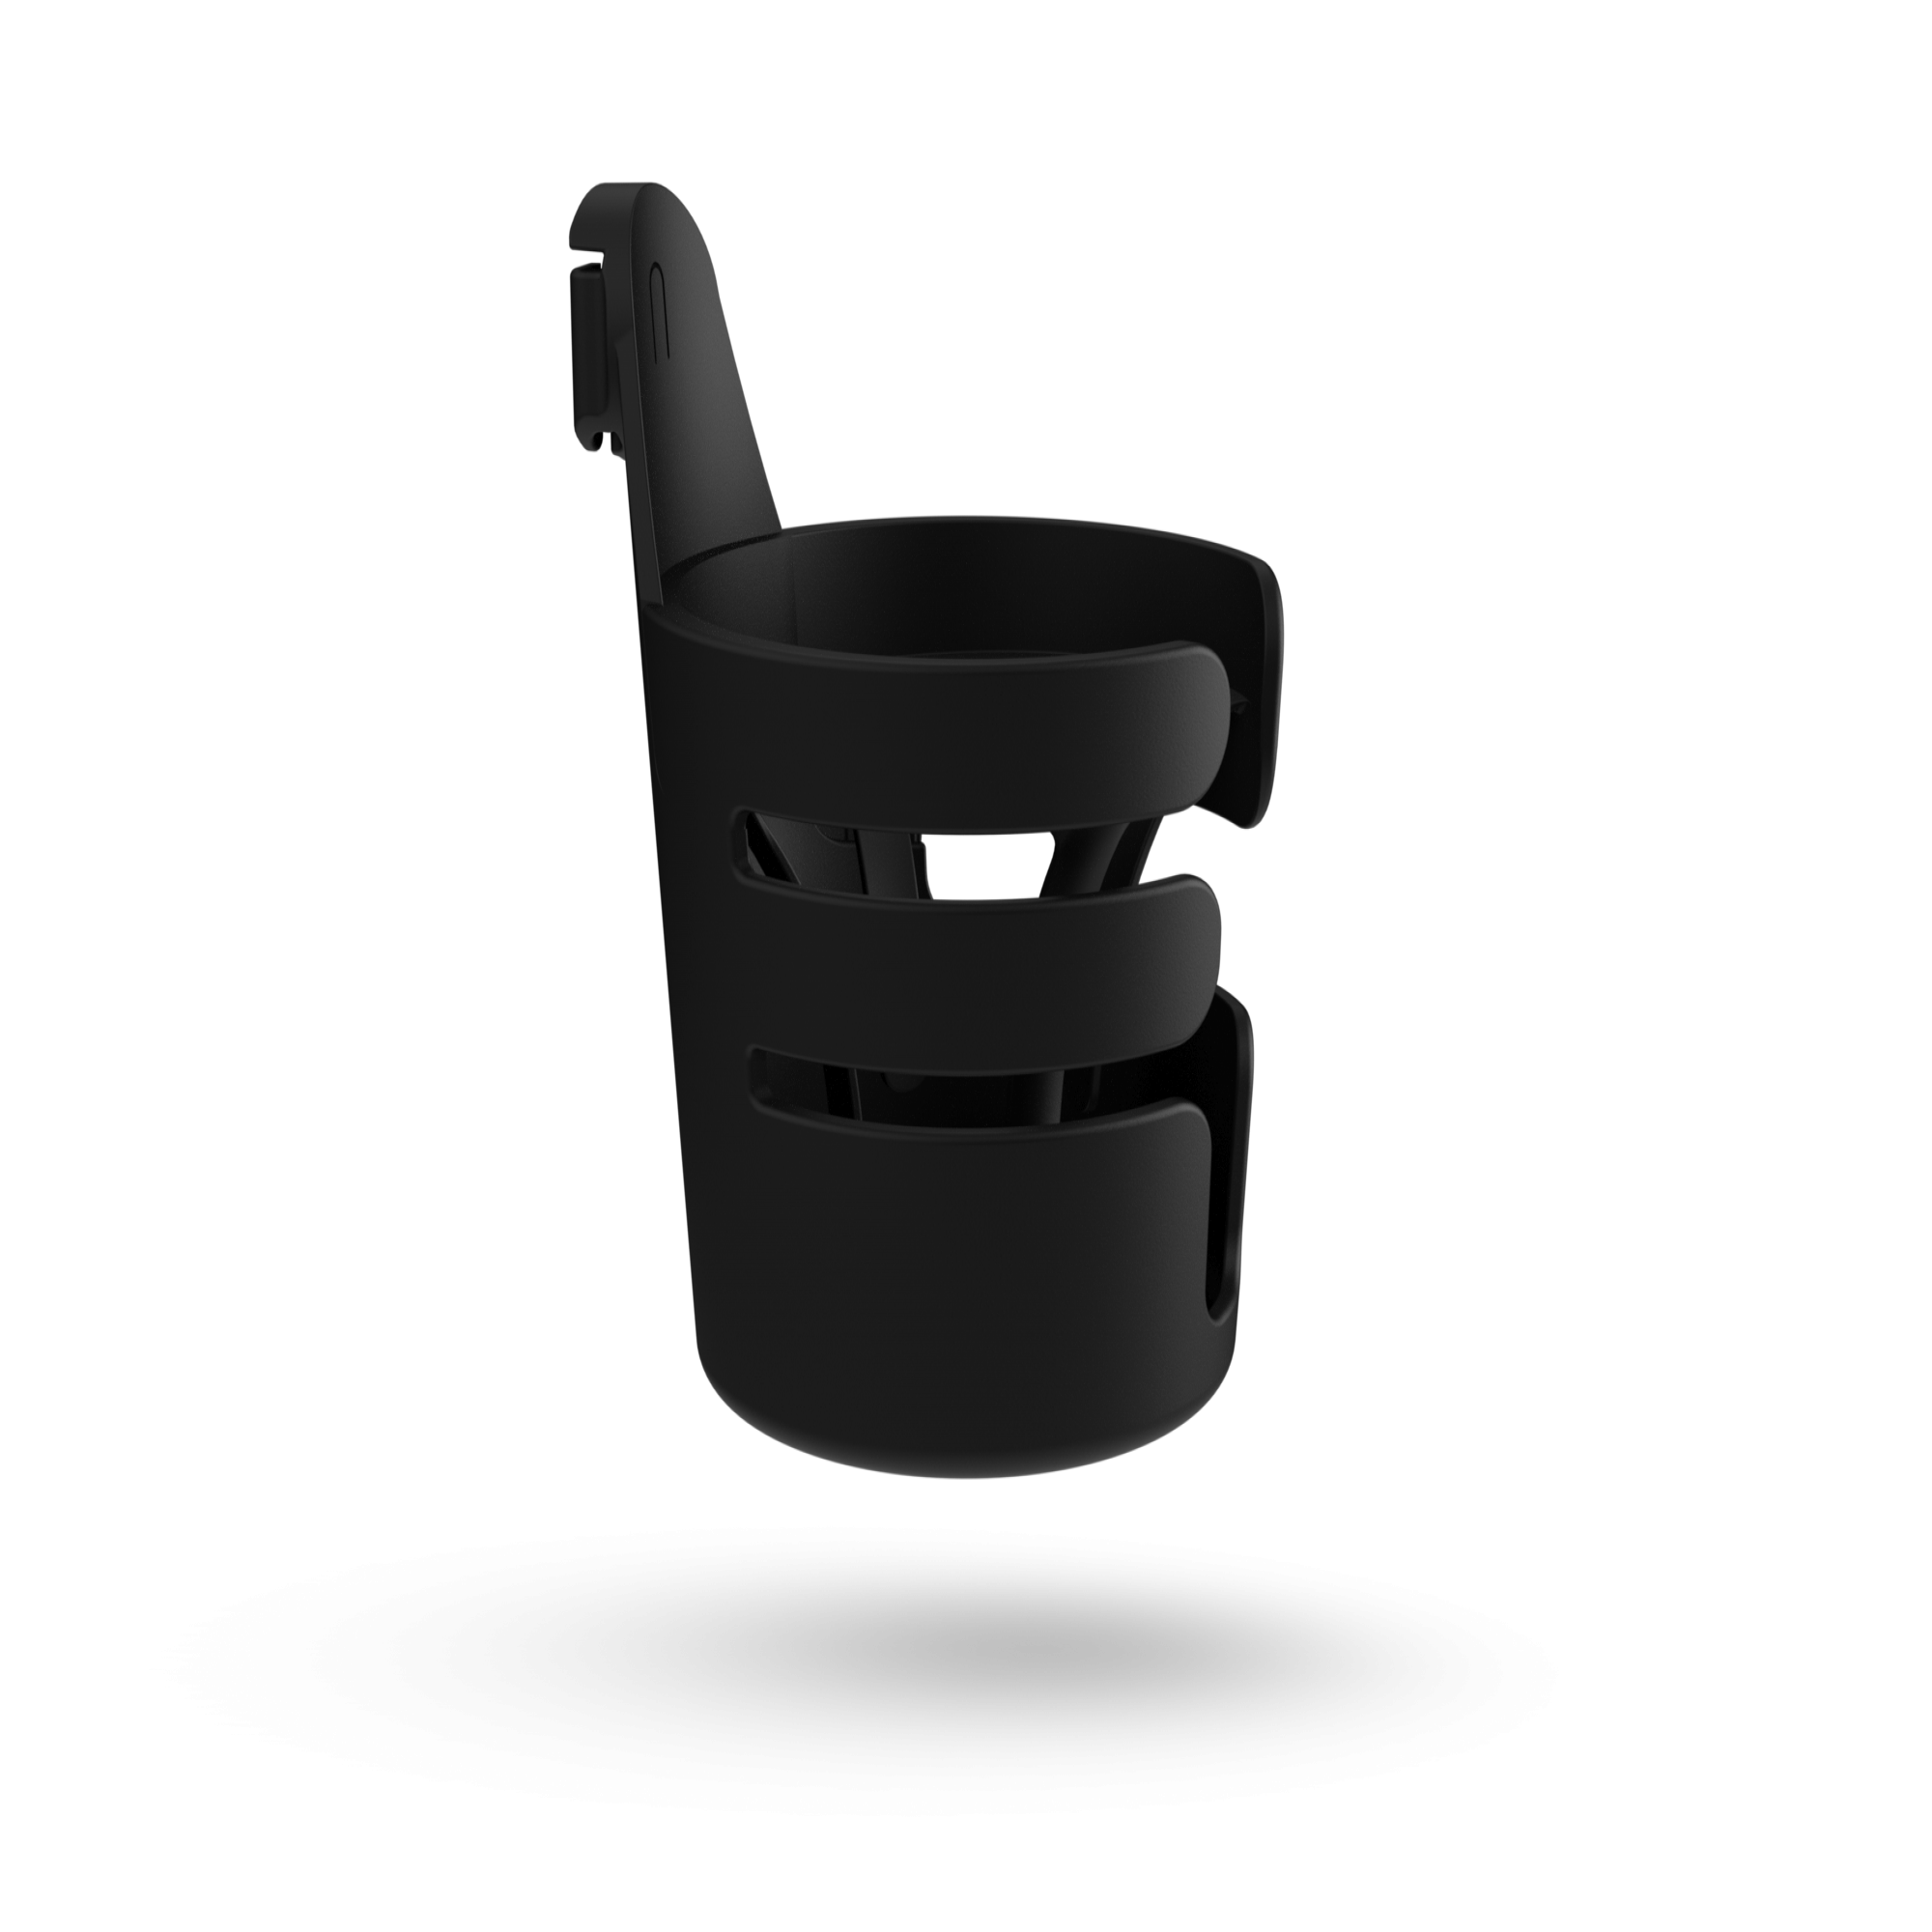 https://www.bugaboo.com/on/demandware.static/-/Sites-bugaboo-master/default/dw5edc0364/images/80500CH03/80500CH03_Bugaboo-cup-holder_2.png